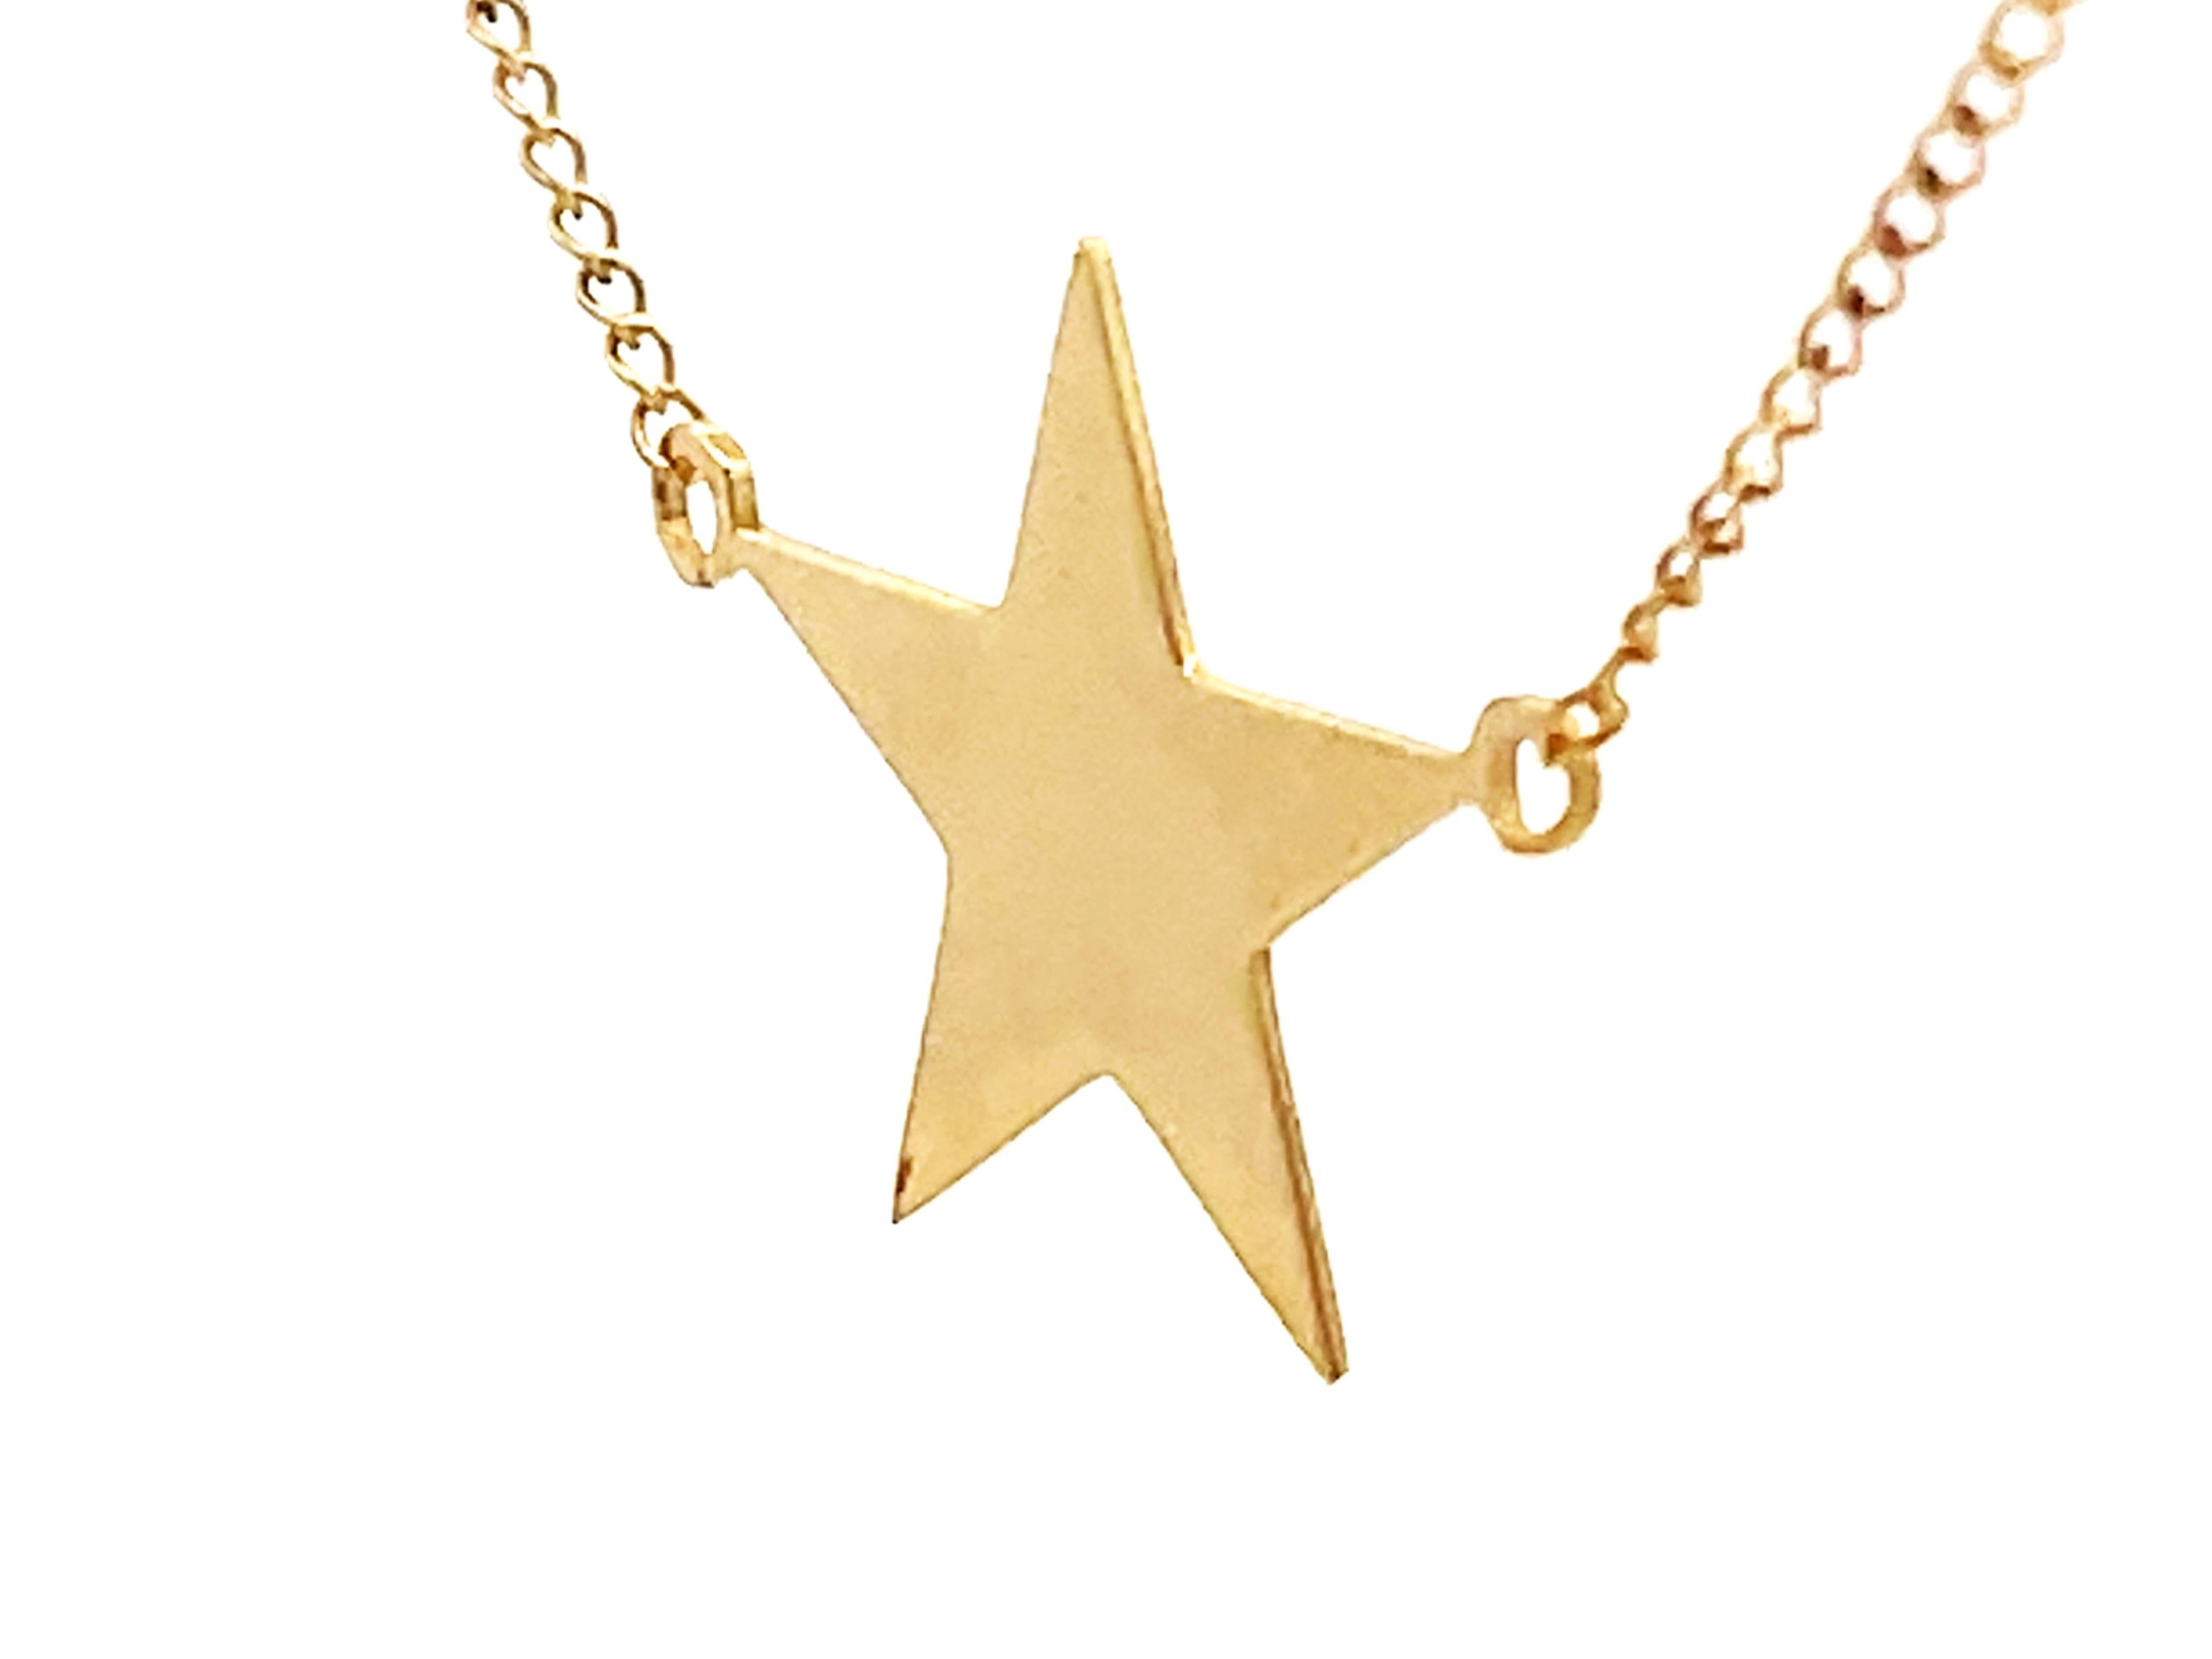 Star Necklace in 14k Yellow Gold In Excellent Condition For Sale In Honolulu, HI